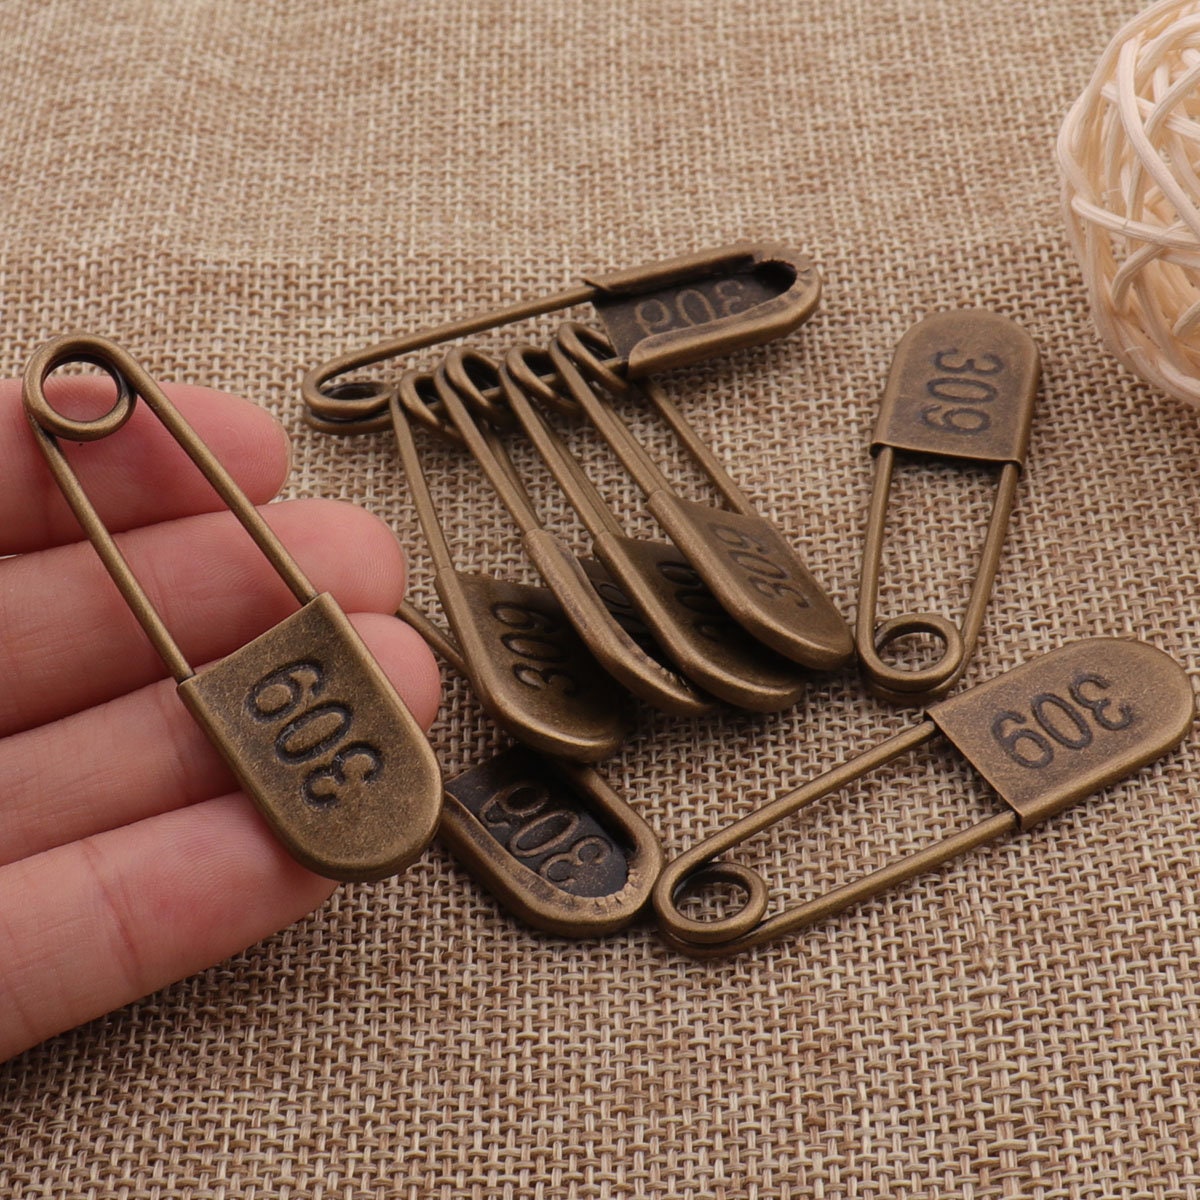 10PCS of 5 Inch Large Safety Pins for Clothes Big Safety Pins Heavy Giant  Safety